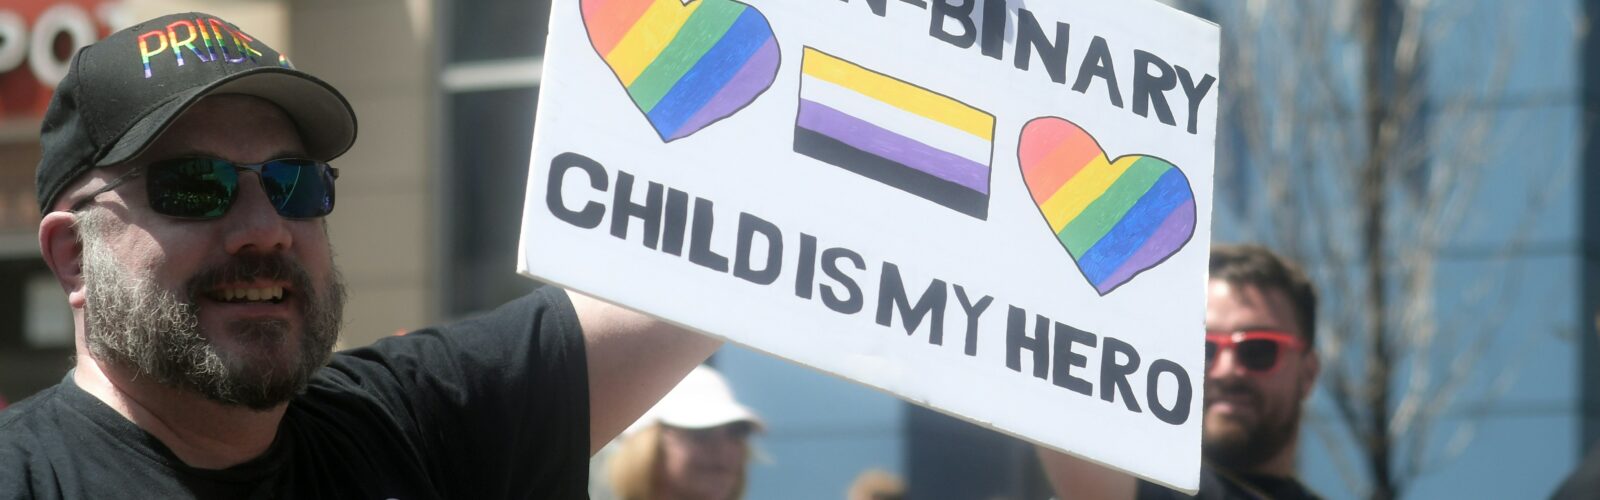 A white man with a beard in a "Pride" hat and sunglasses holds up a hand-written sign reading, "My non-binary child is my hero." The sign includes two rainbow-striped hearts and a non-binary pride flag with yellow, white, purple and black stripes.